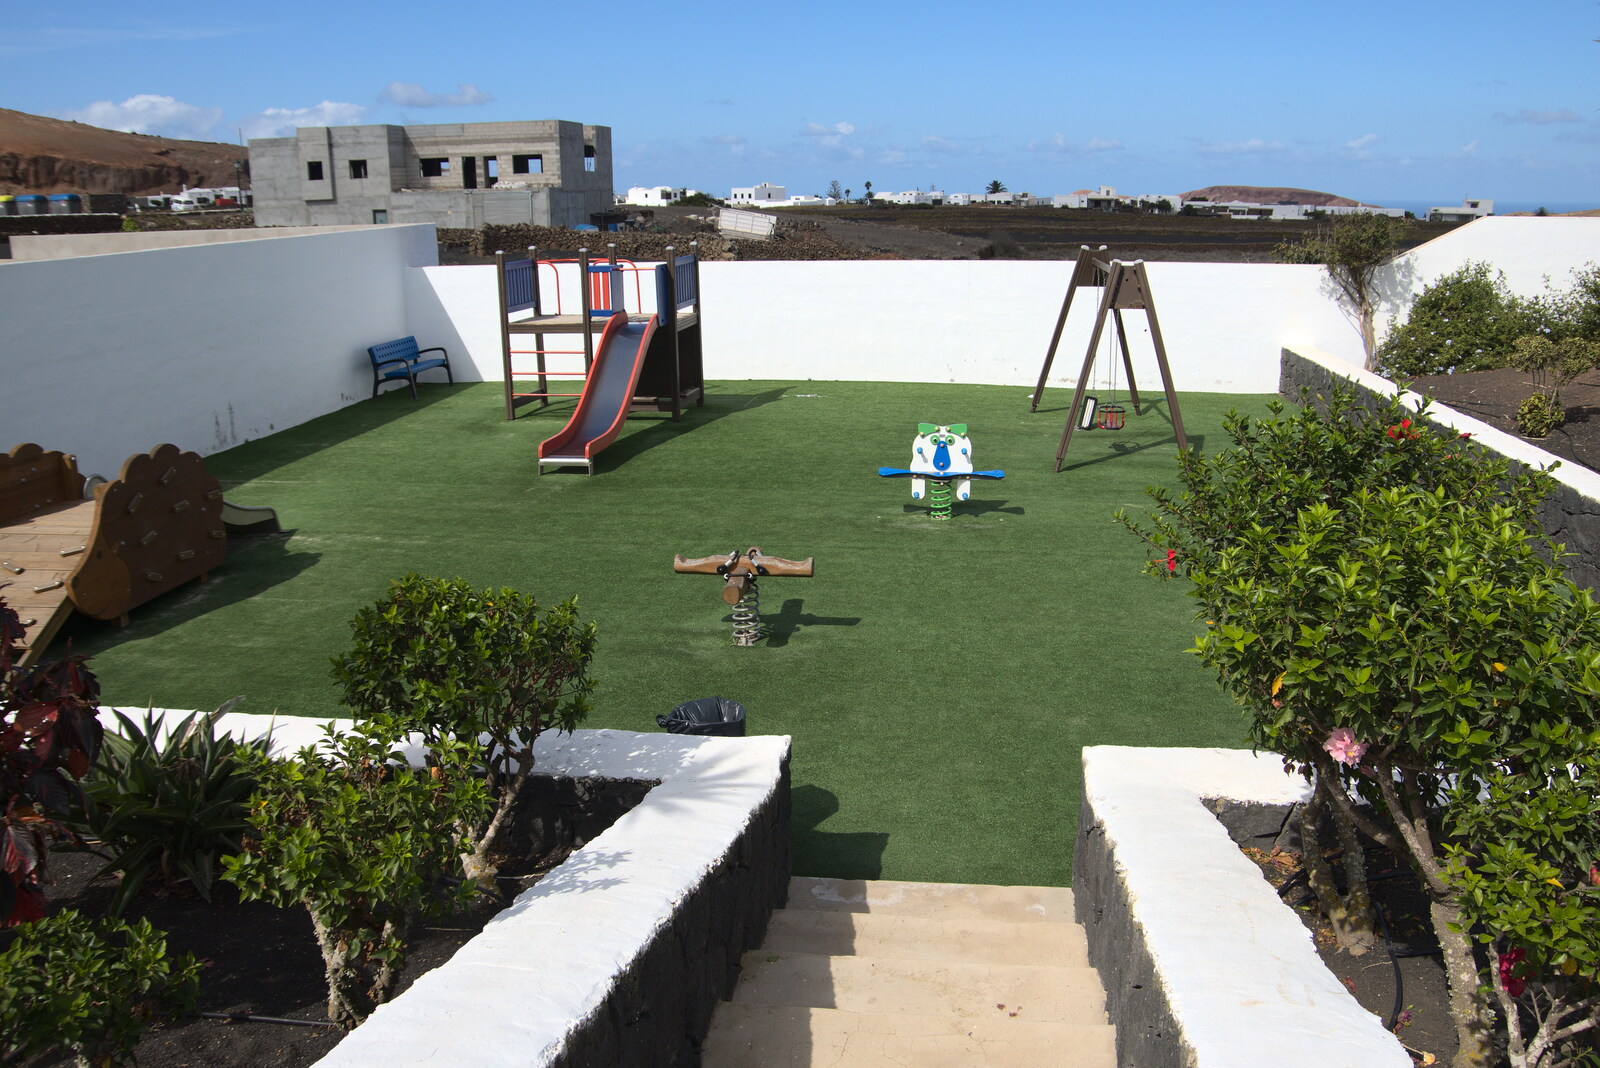 A playground is an oasis of green  from The Volcanoes of Lanzarote, Canary Islands, Spain - 27th October 2021